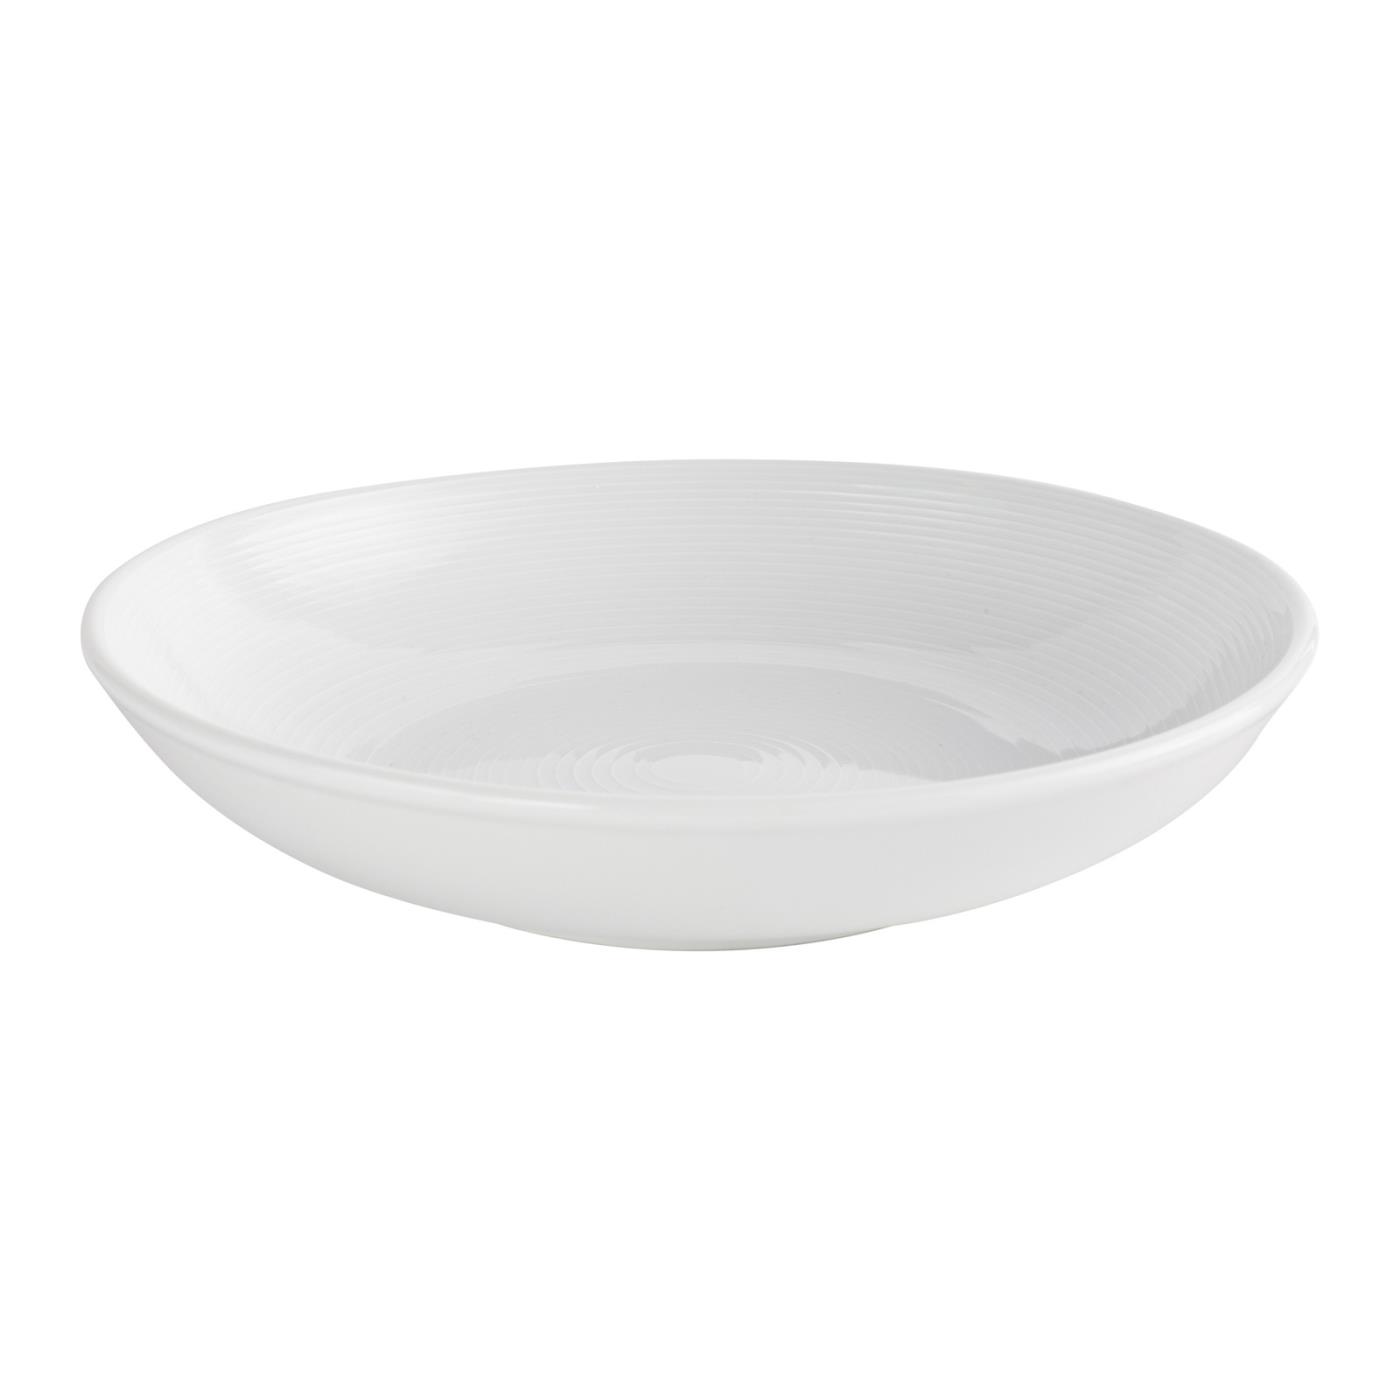 White Coupe Collection -  Pasta Bowl 9.5"